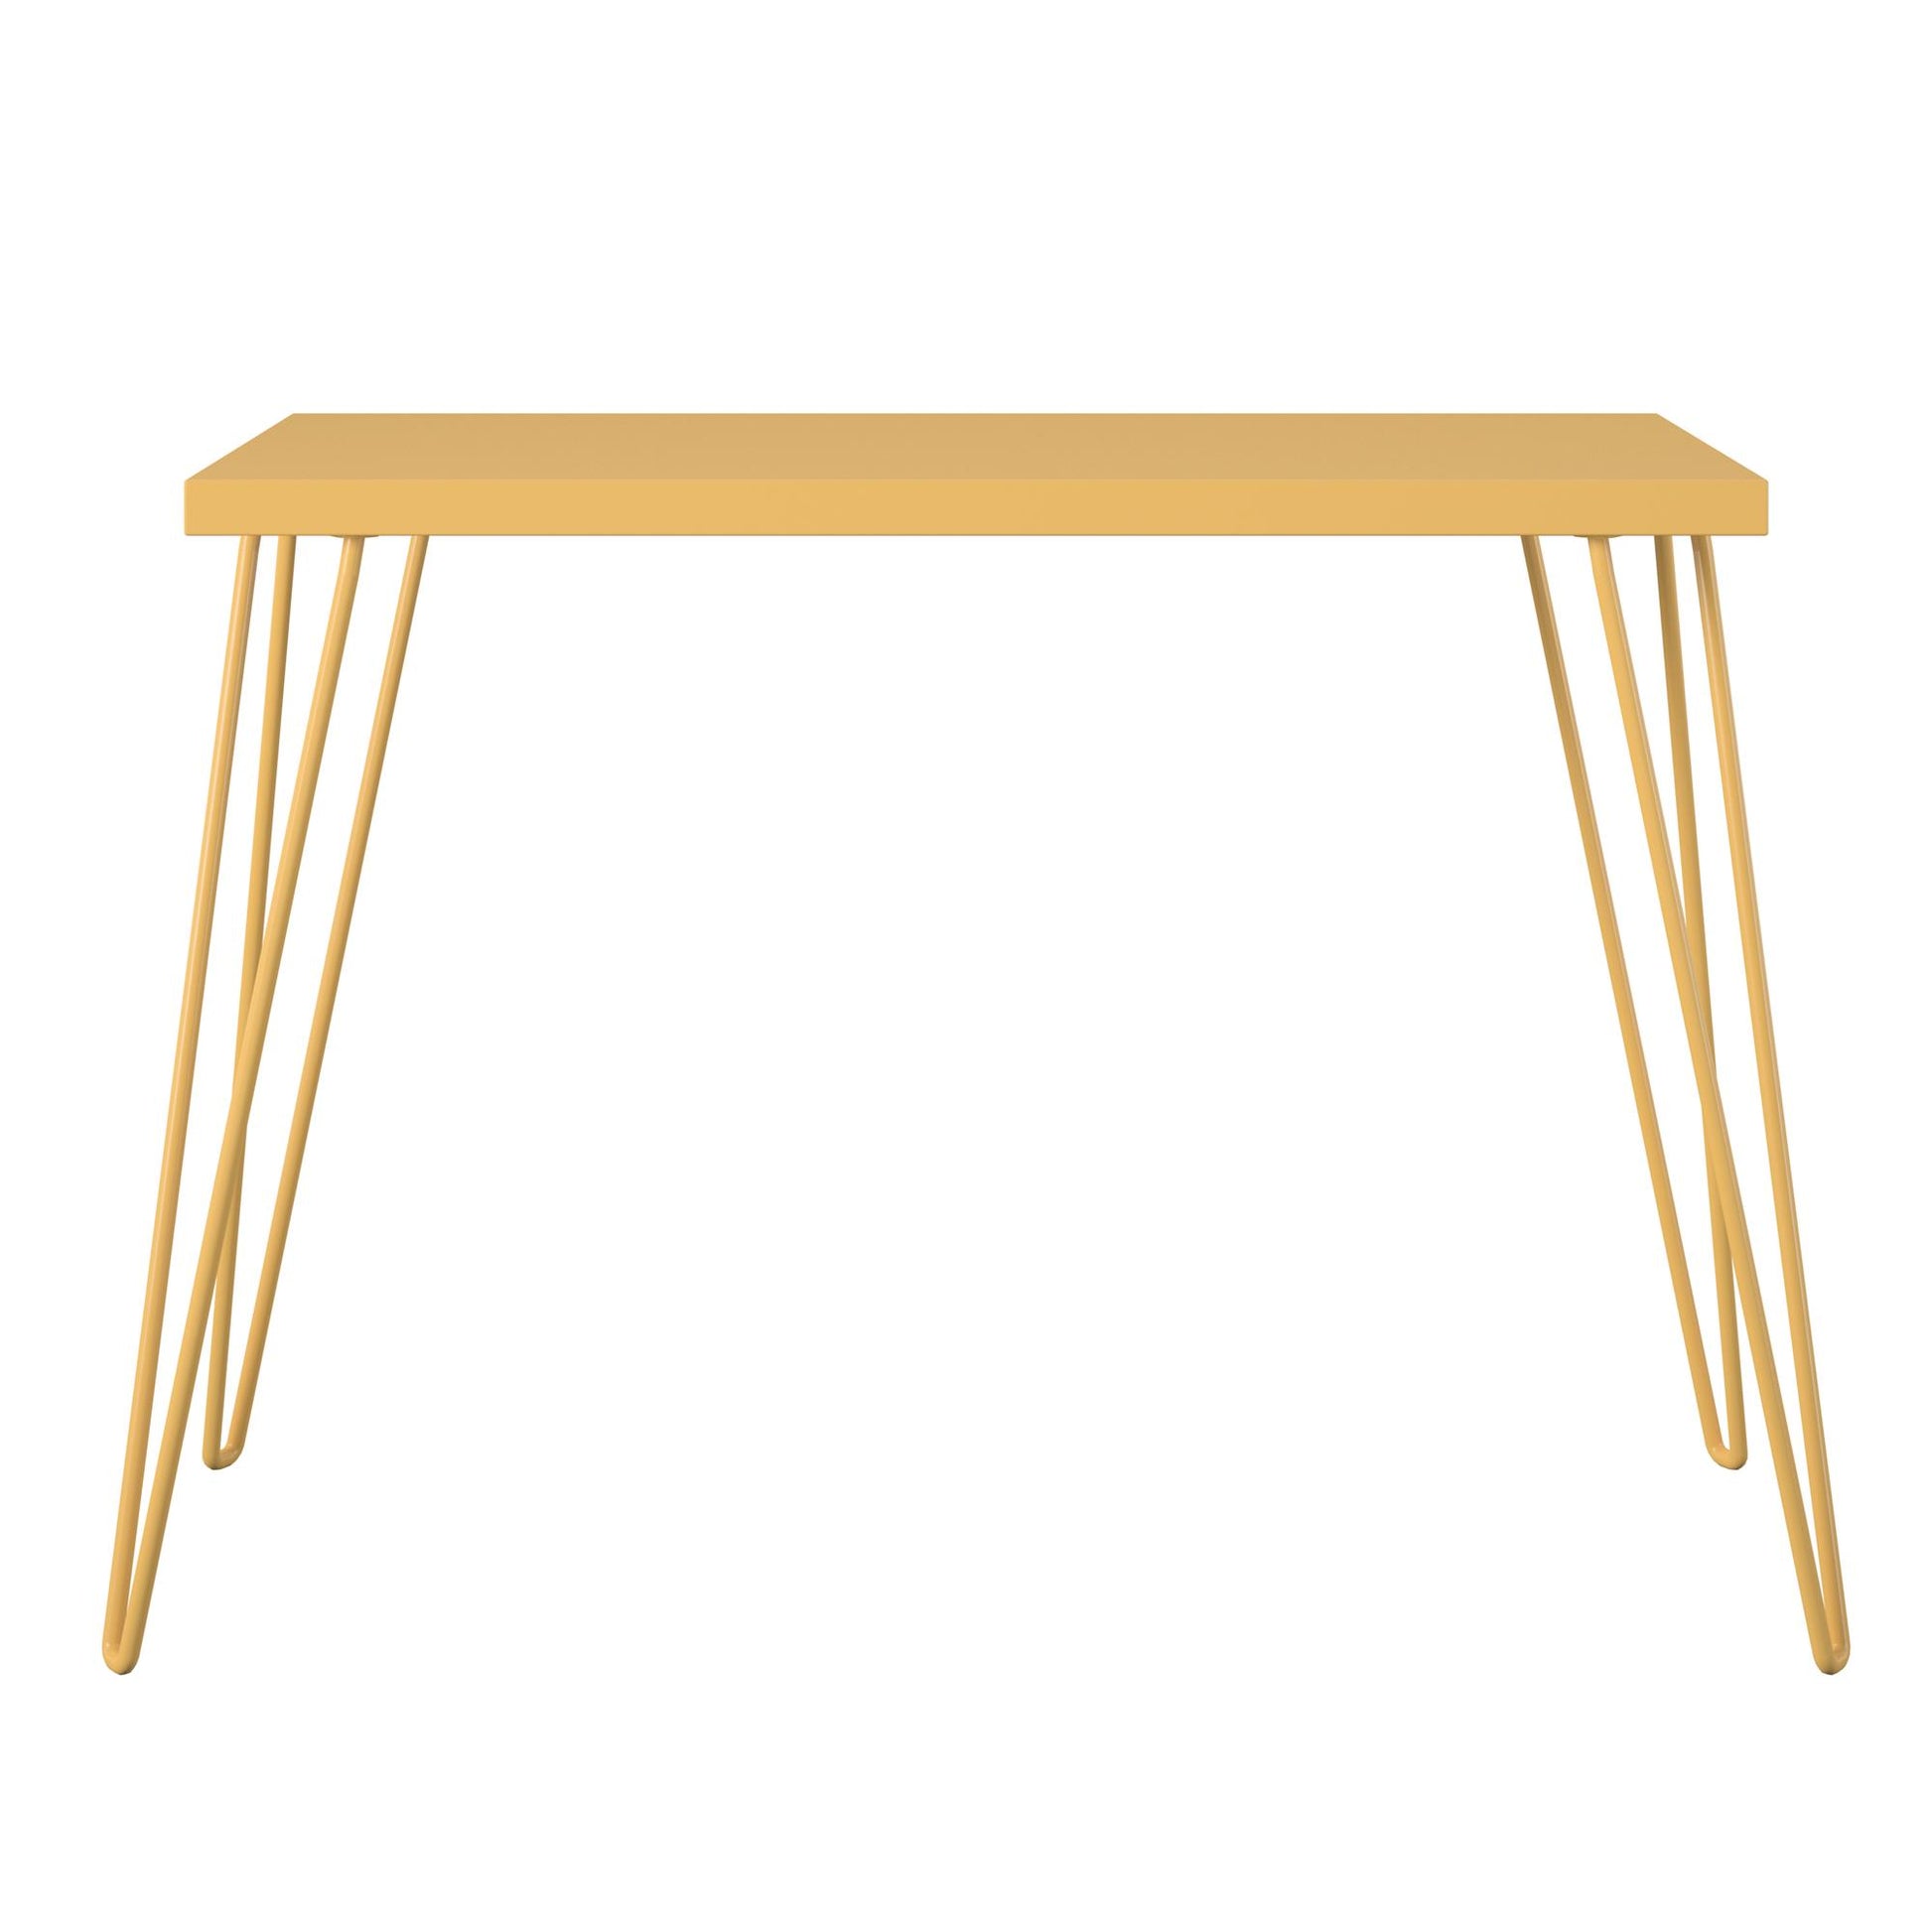 Owen Retro Computer Desk with Large Worksurface and Hairpin Legs - Yellow